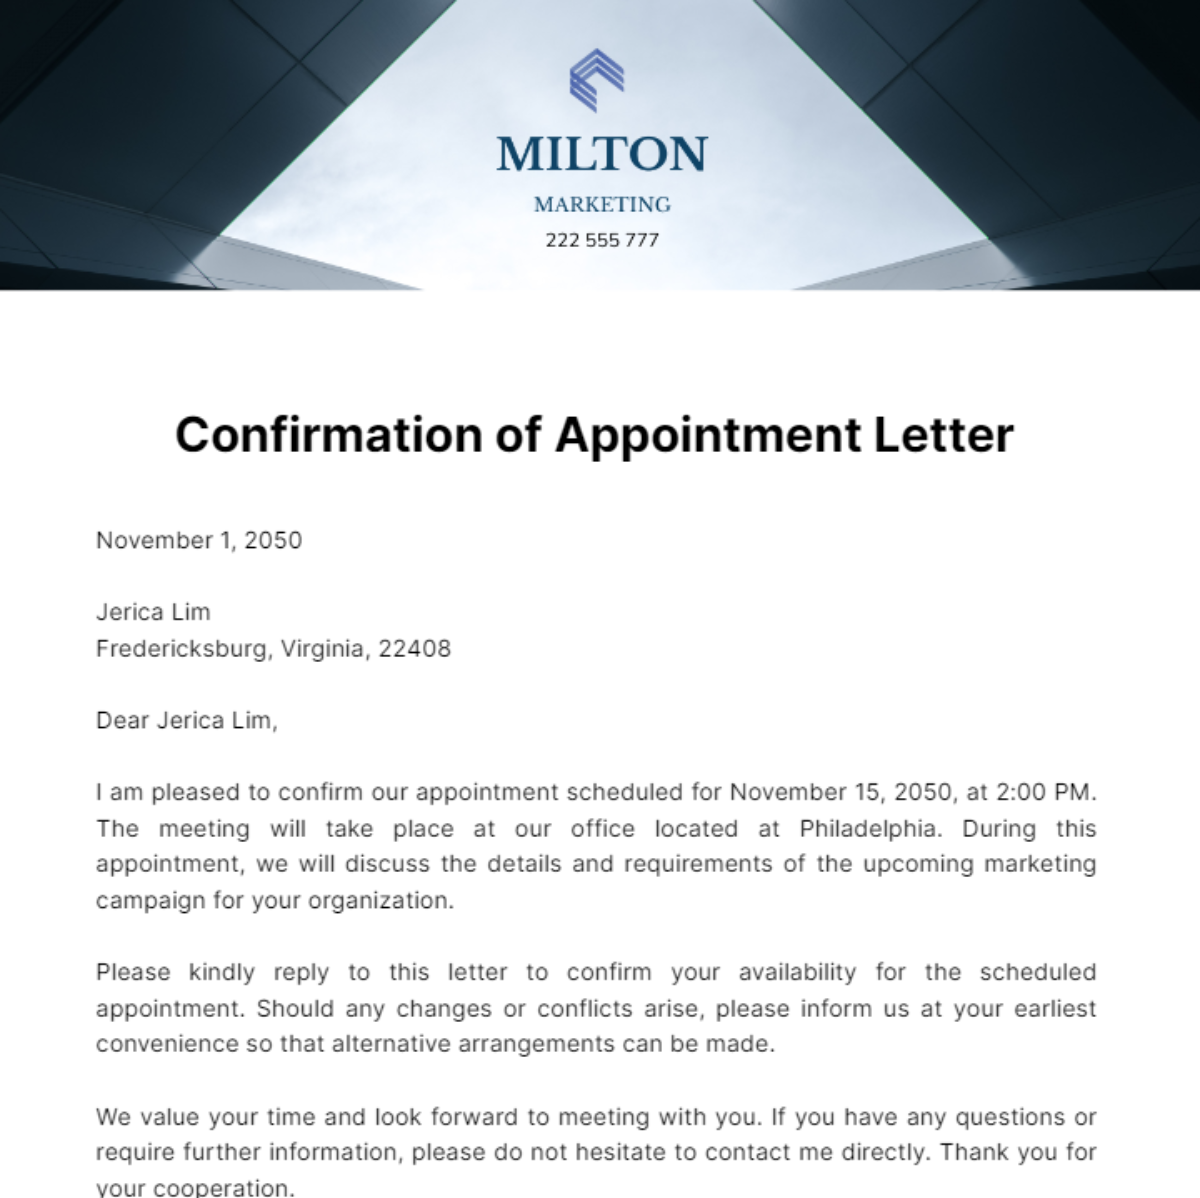 Confirmation of Appointment Letter Template